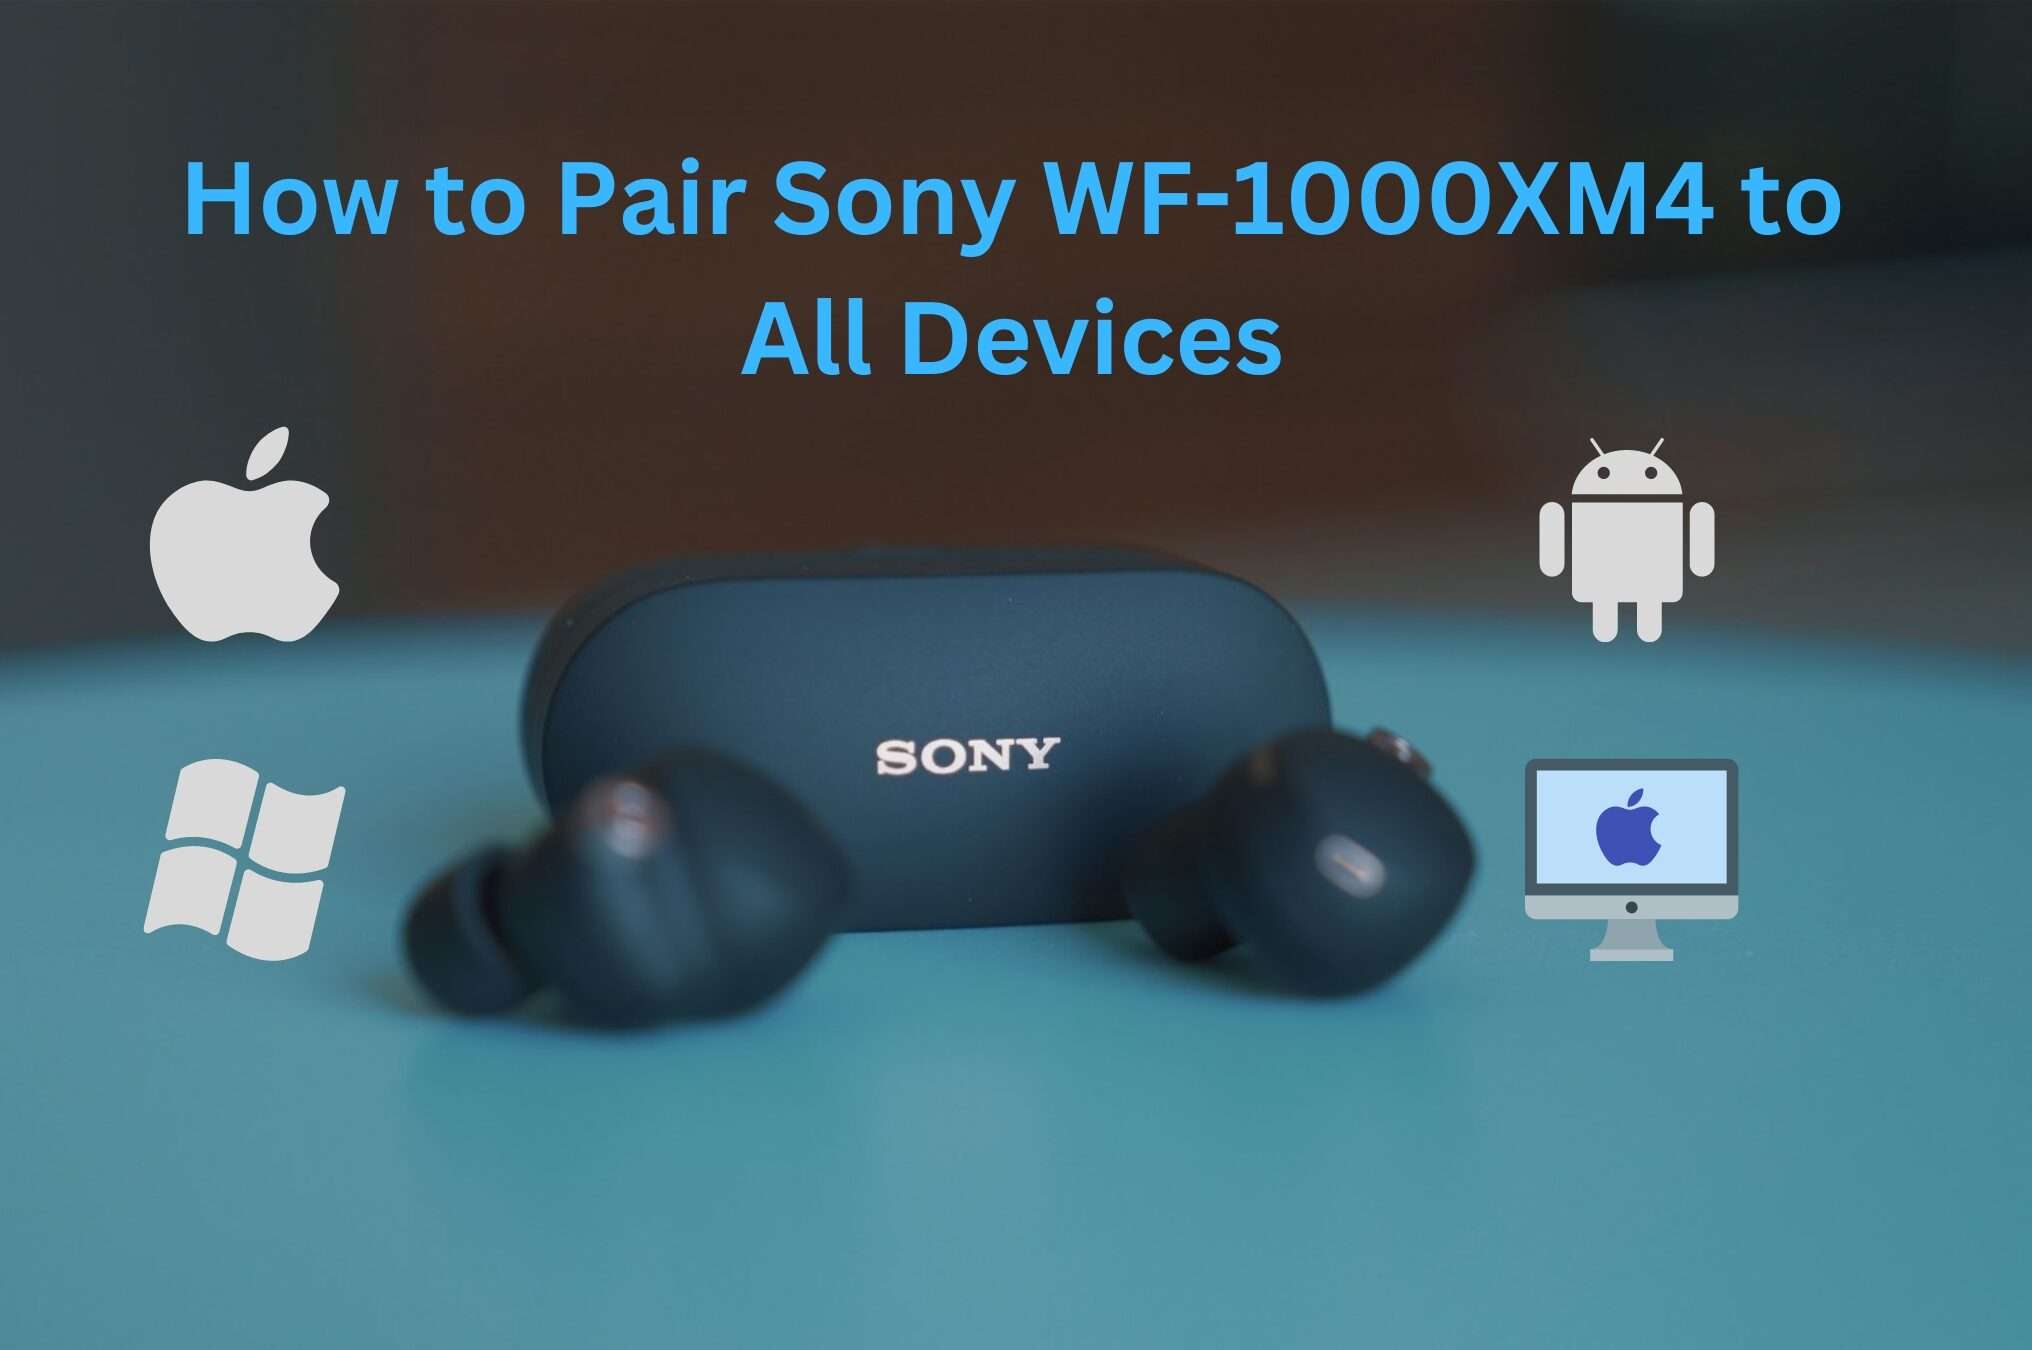 How to Pair Sony WF-1000XM4 to All Devices